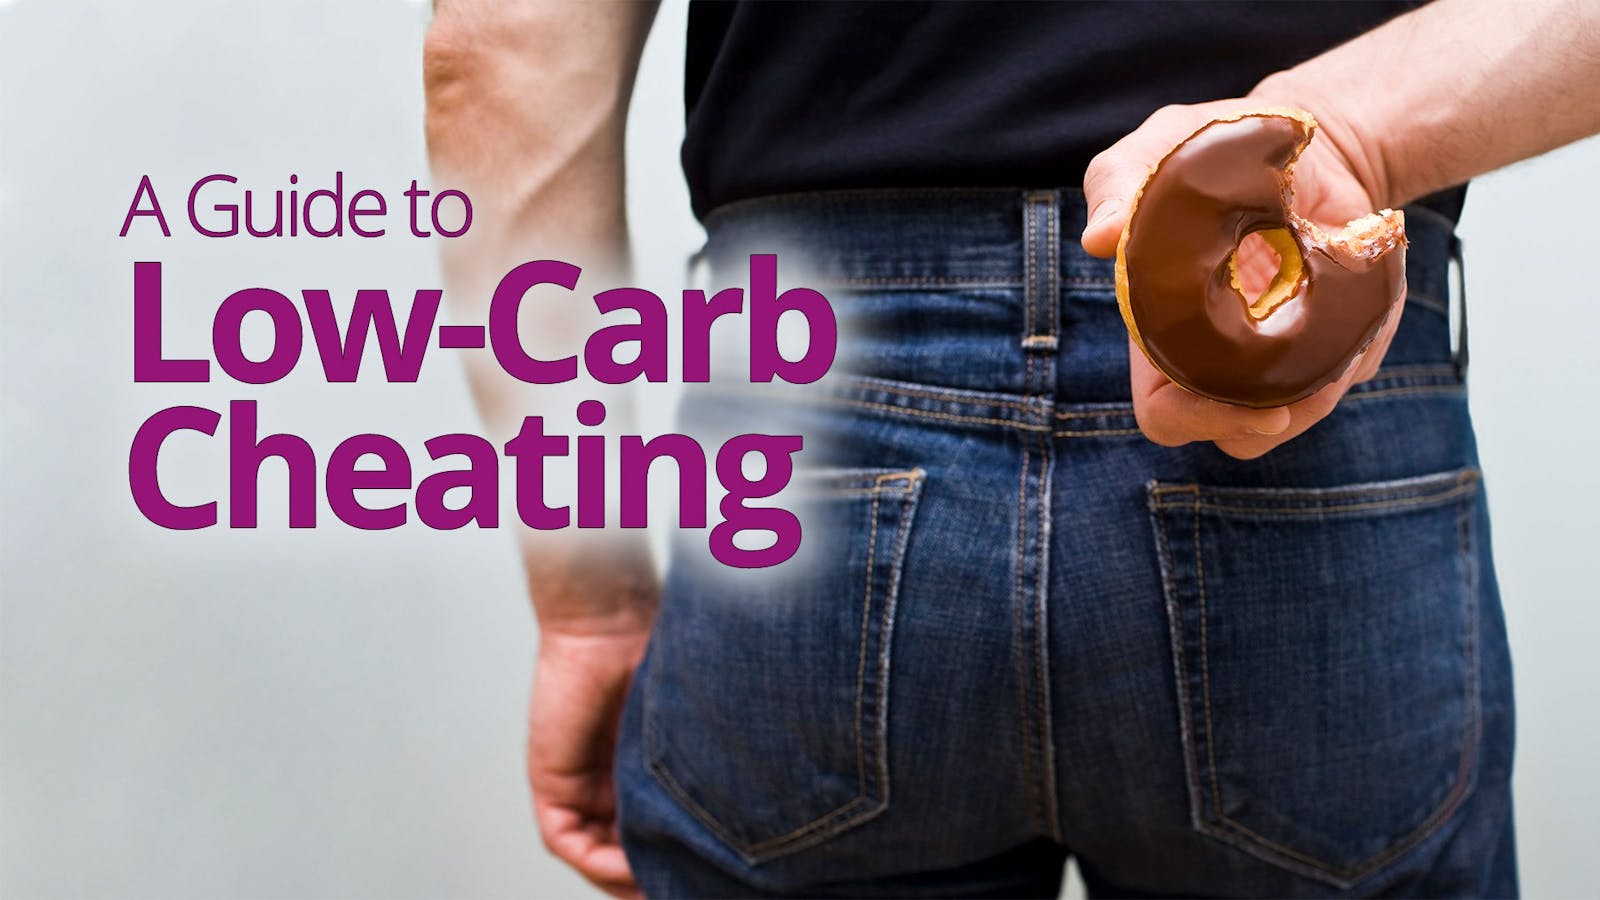 A Guide to Low-Carb Cheating